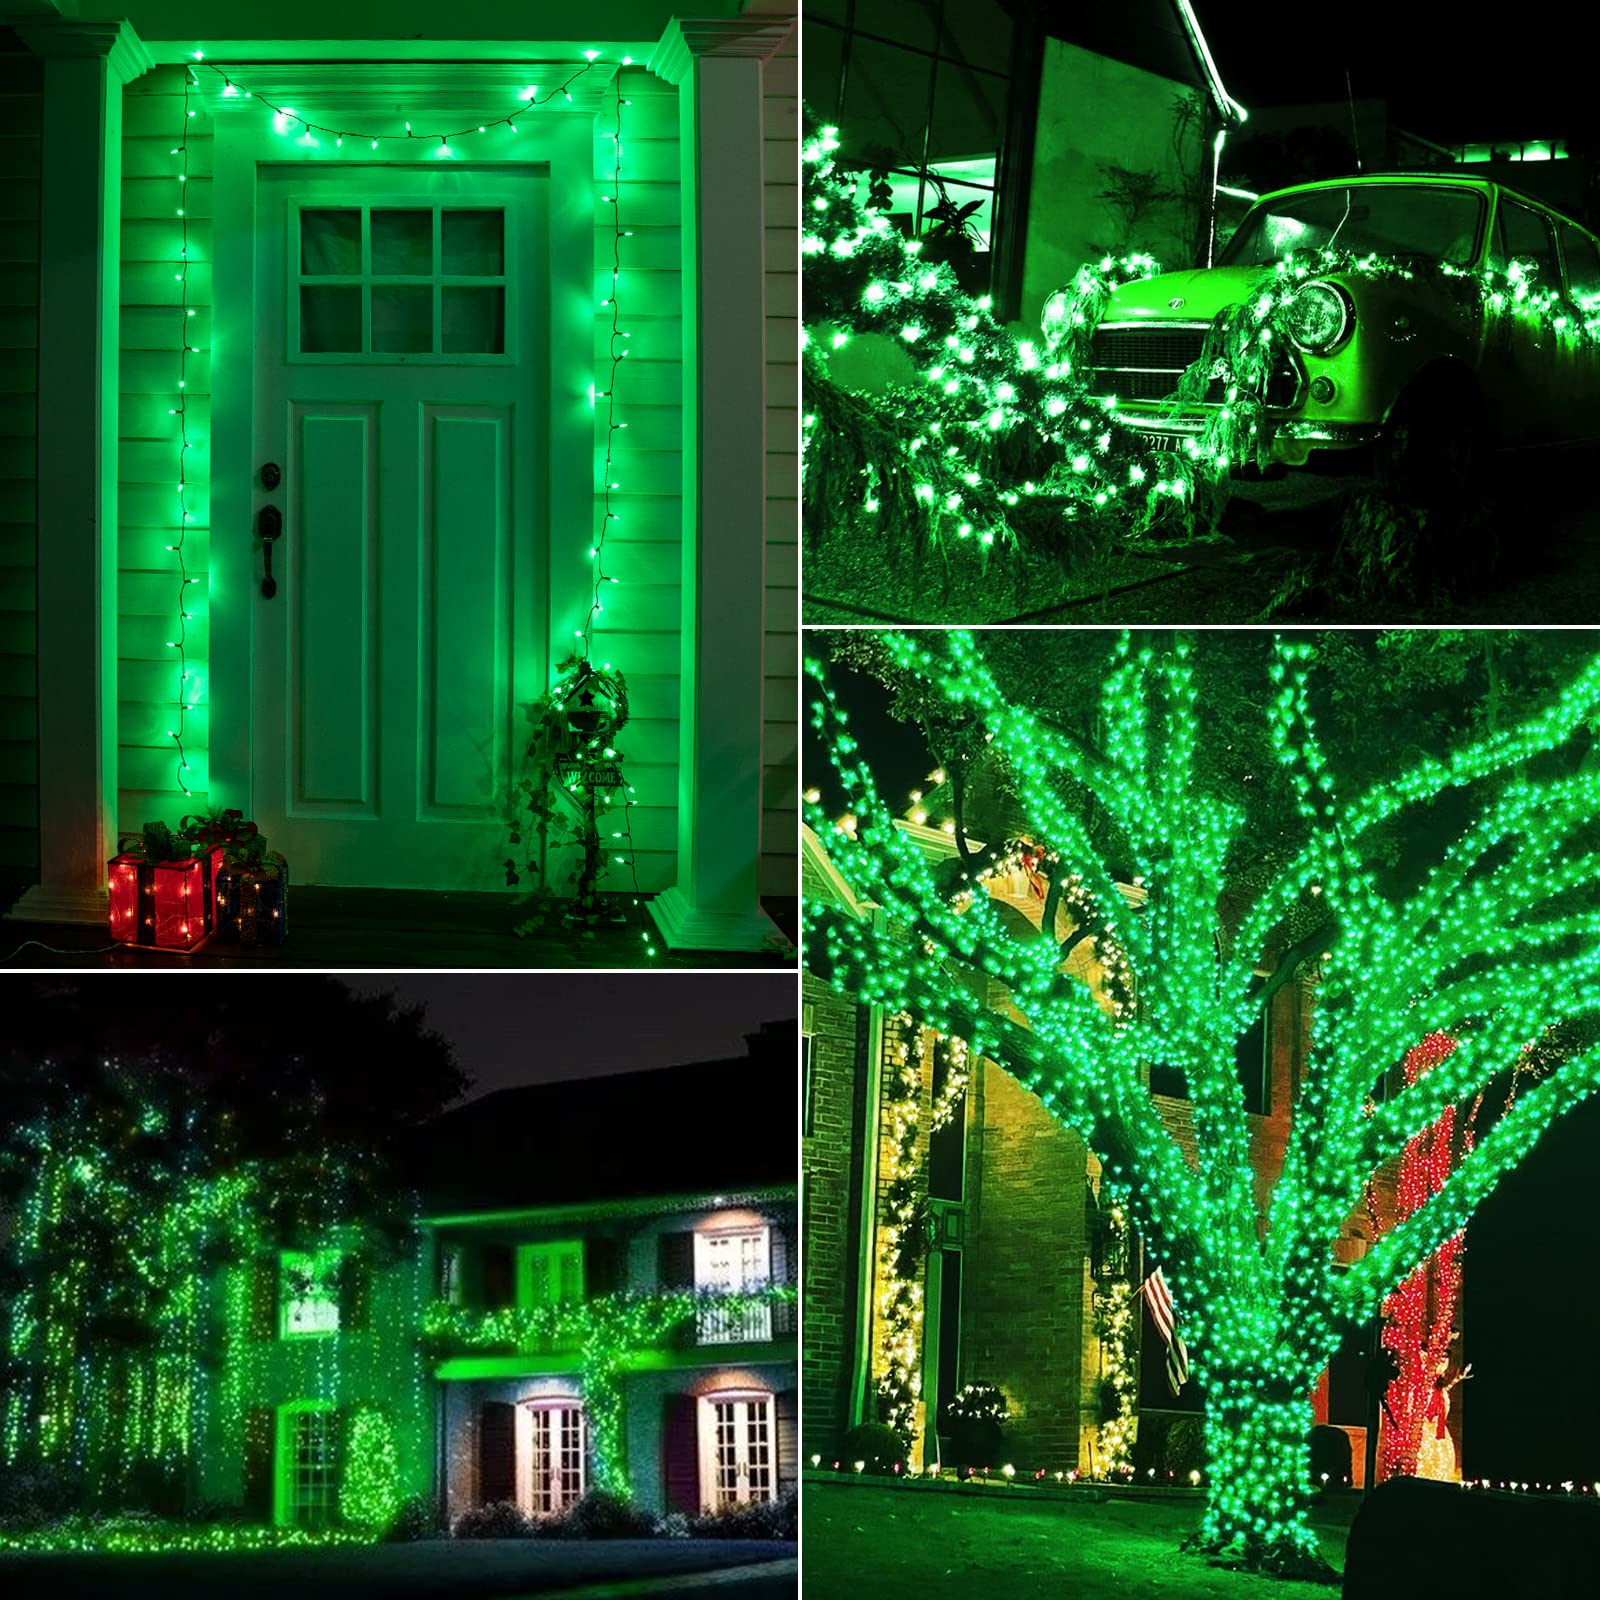 39 Feet / 100 LED / Green / Green Wire